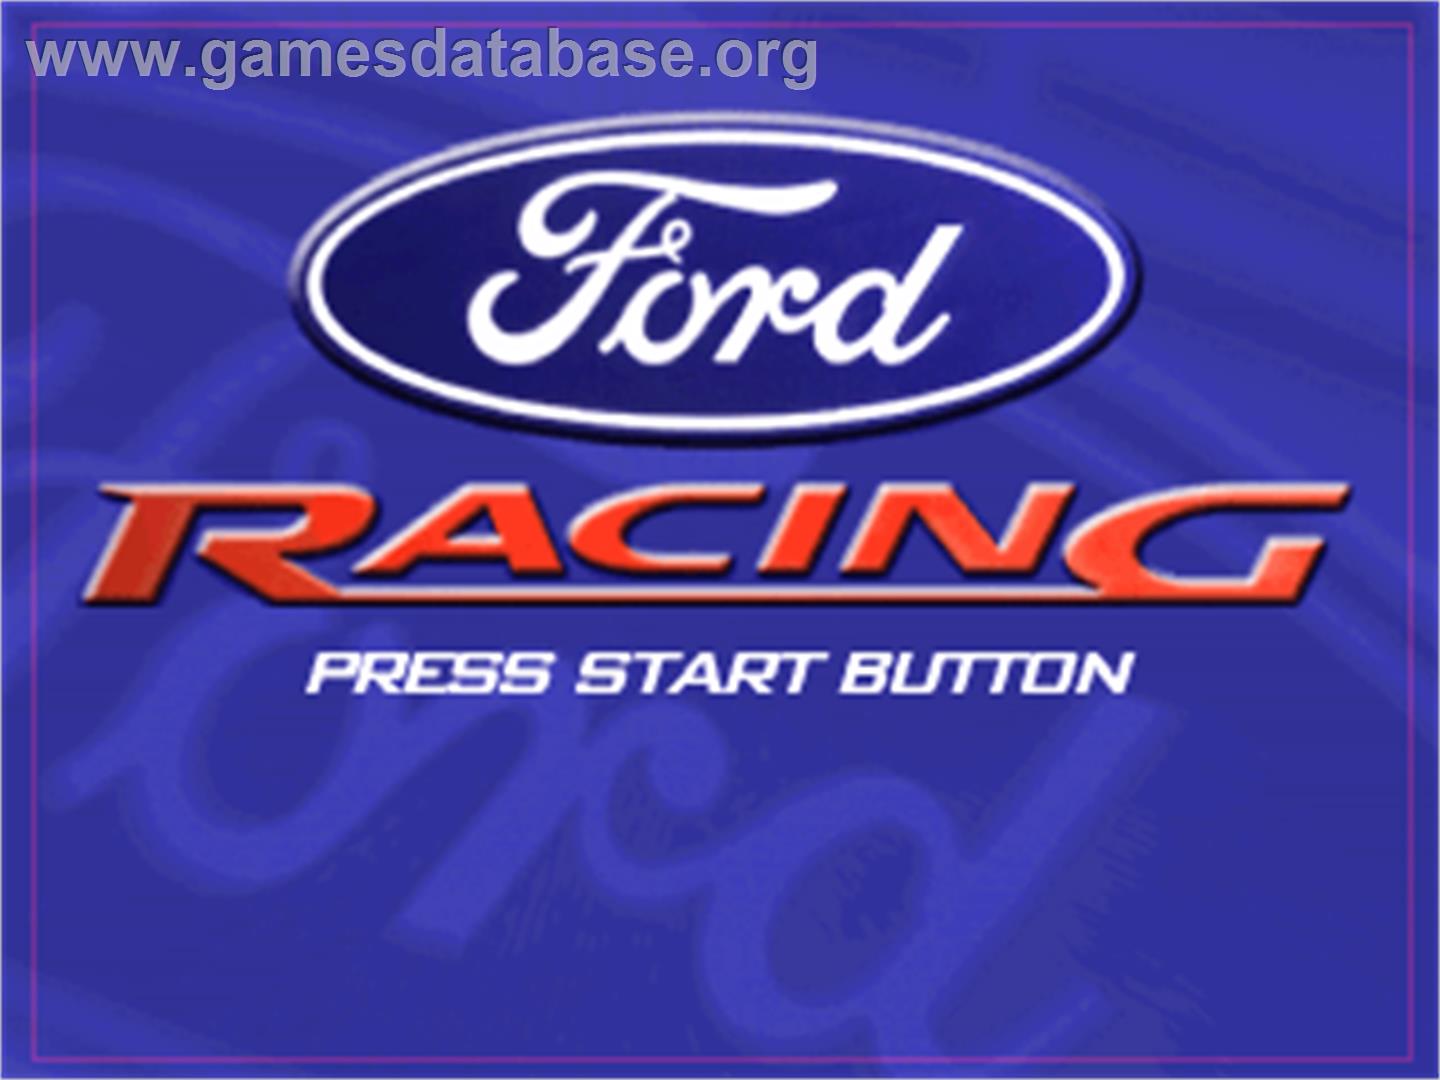 Ford Racing - Sony Playstation - Artwork - Title Screen